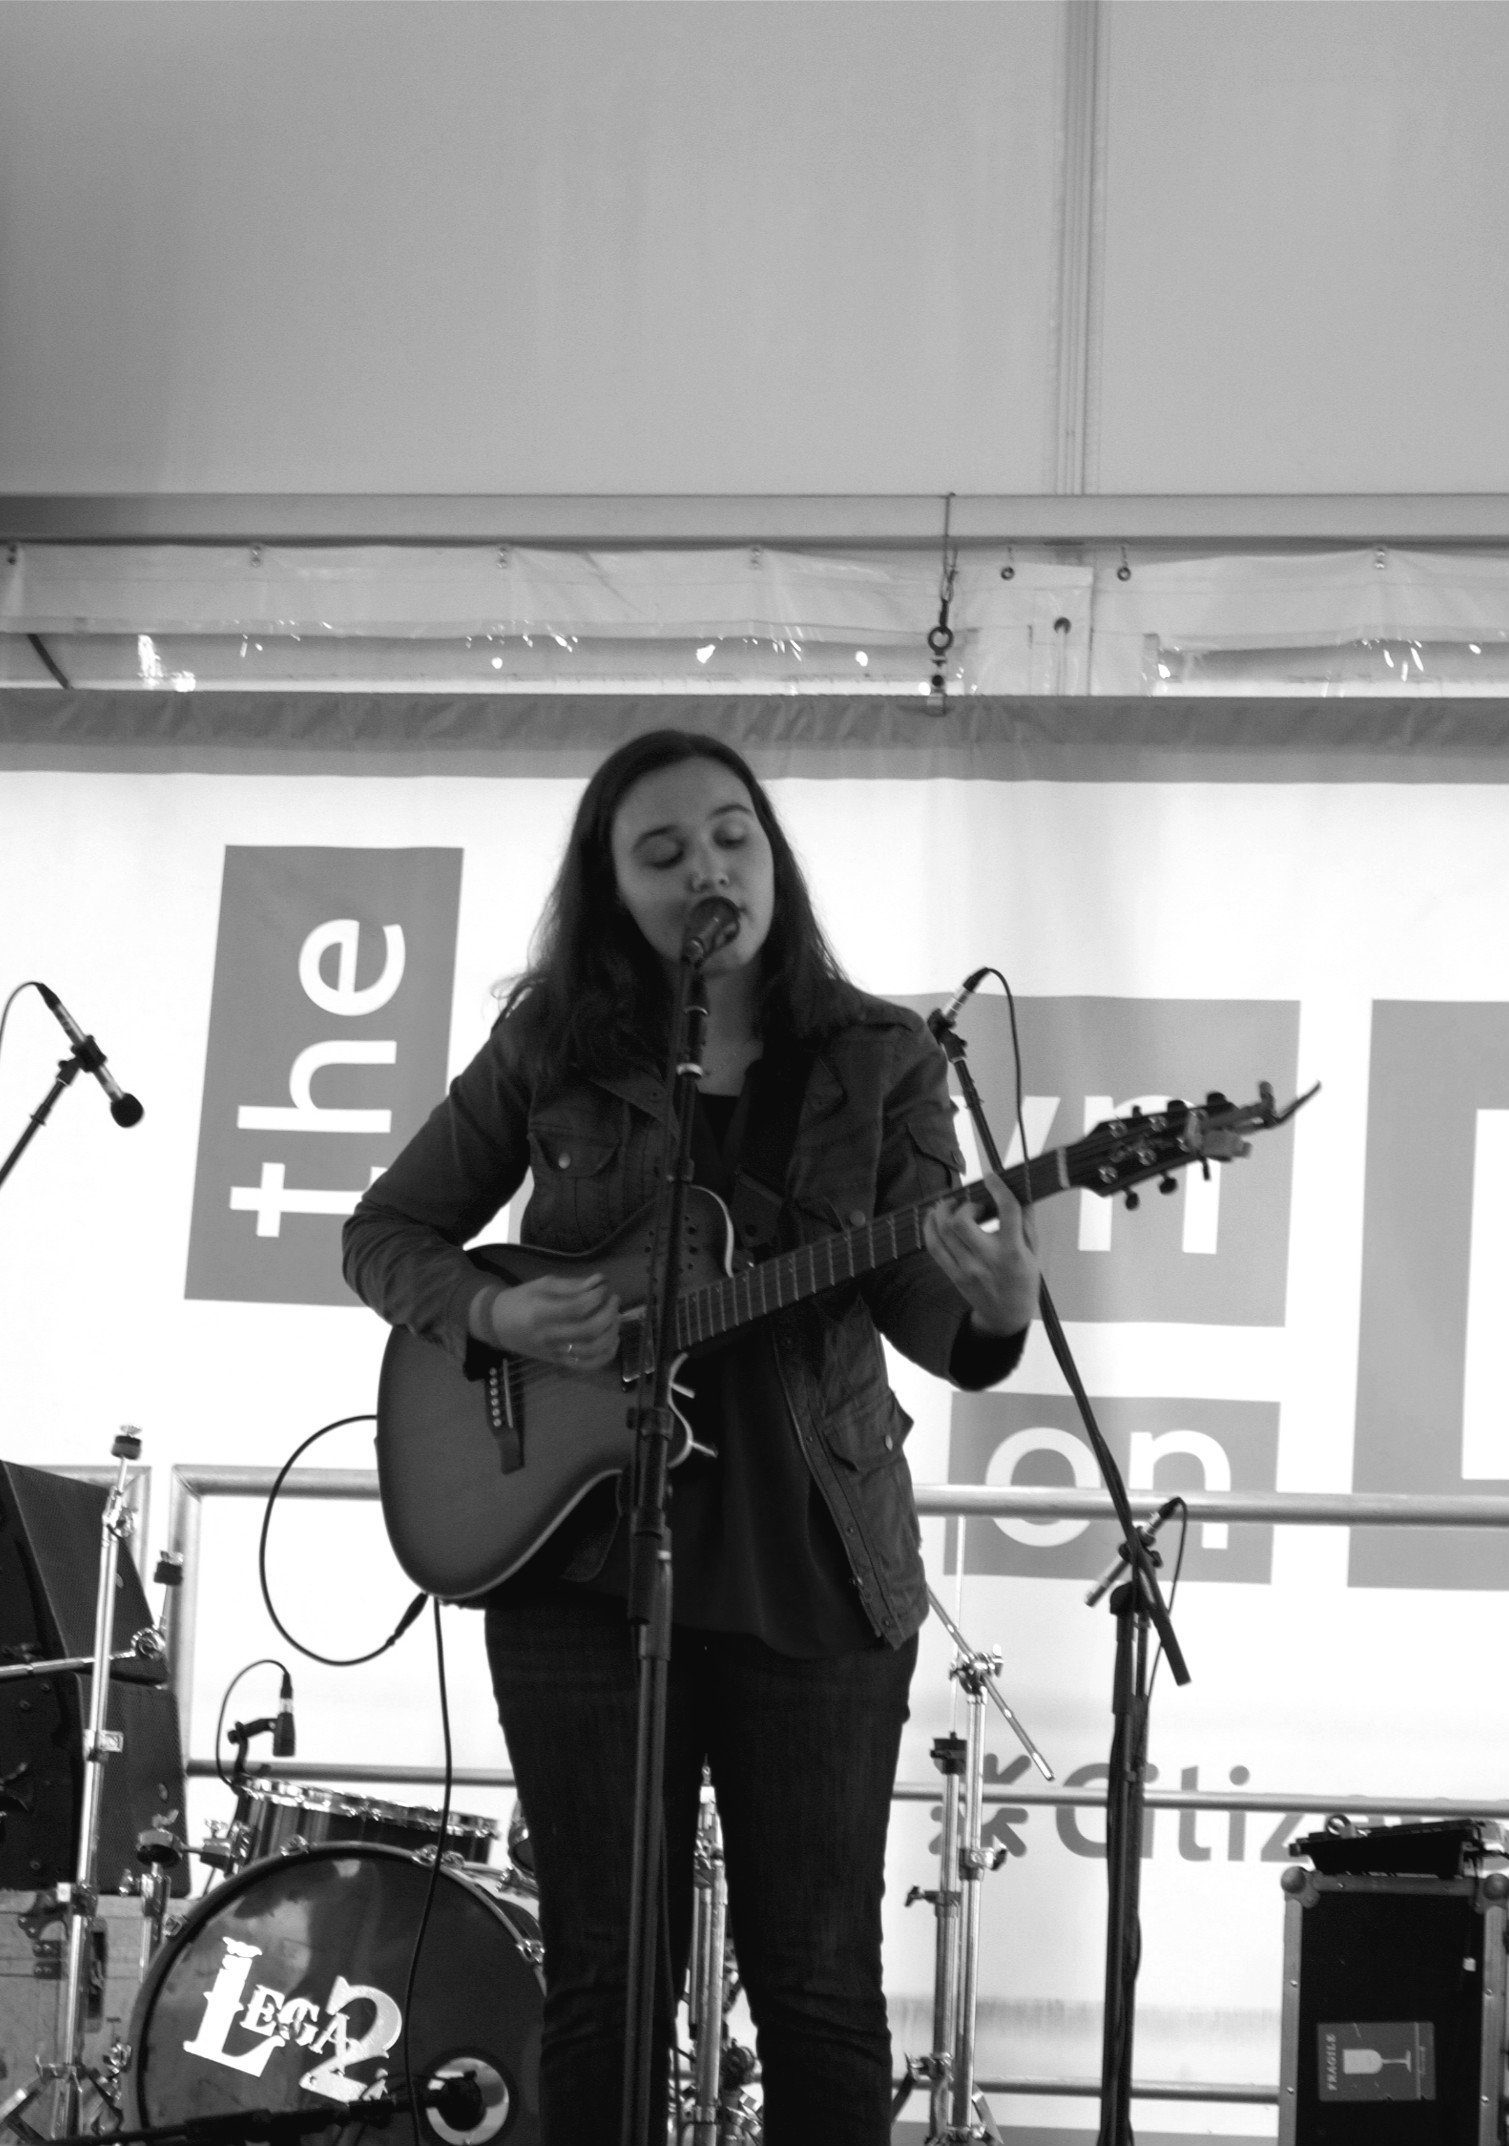 Kate Diaz sings her favorite songs "On My Own" and “"Play The Part” at the Gilded Fest. Diaz, originally from Chicago, now lives in Boson as a singer songwriter. She posts her music on YouTube and wanted to share her covers on the Gilded Fest stage. 